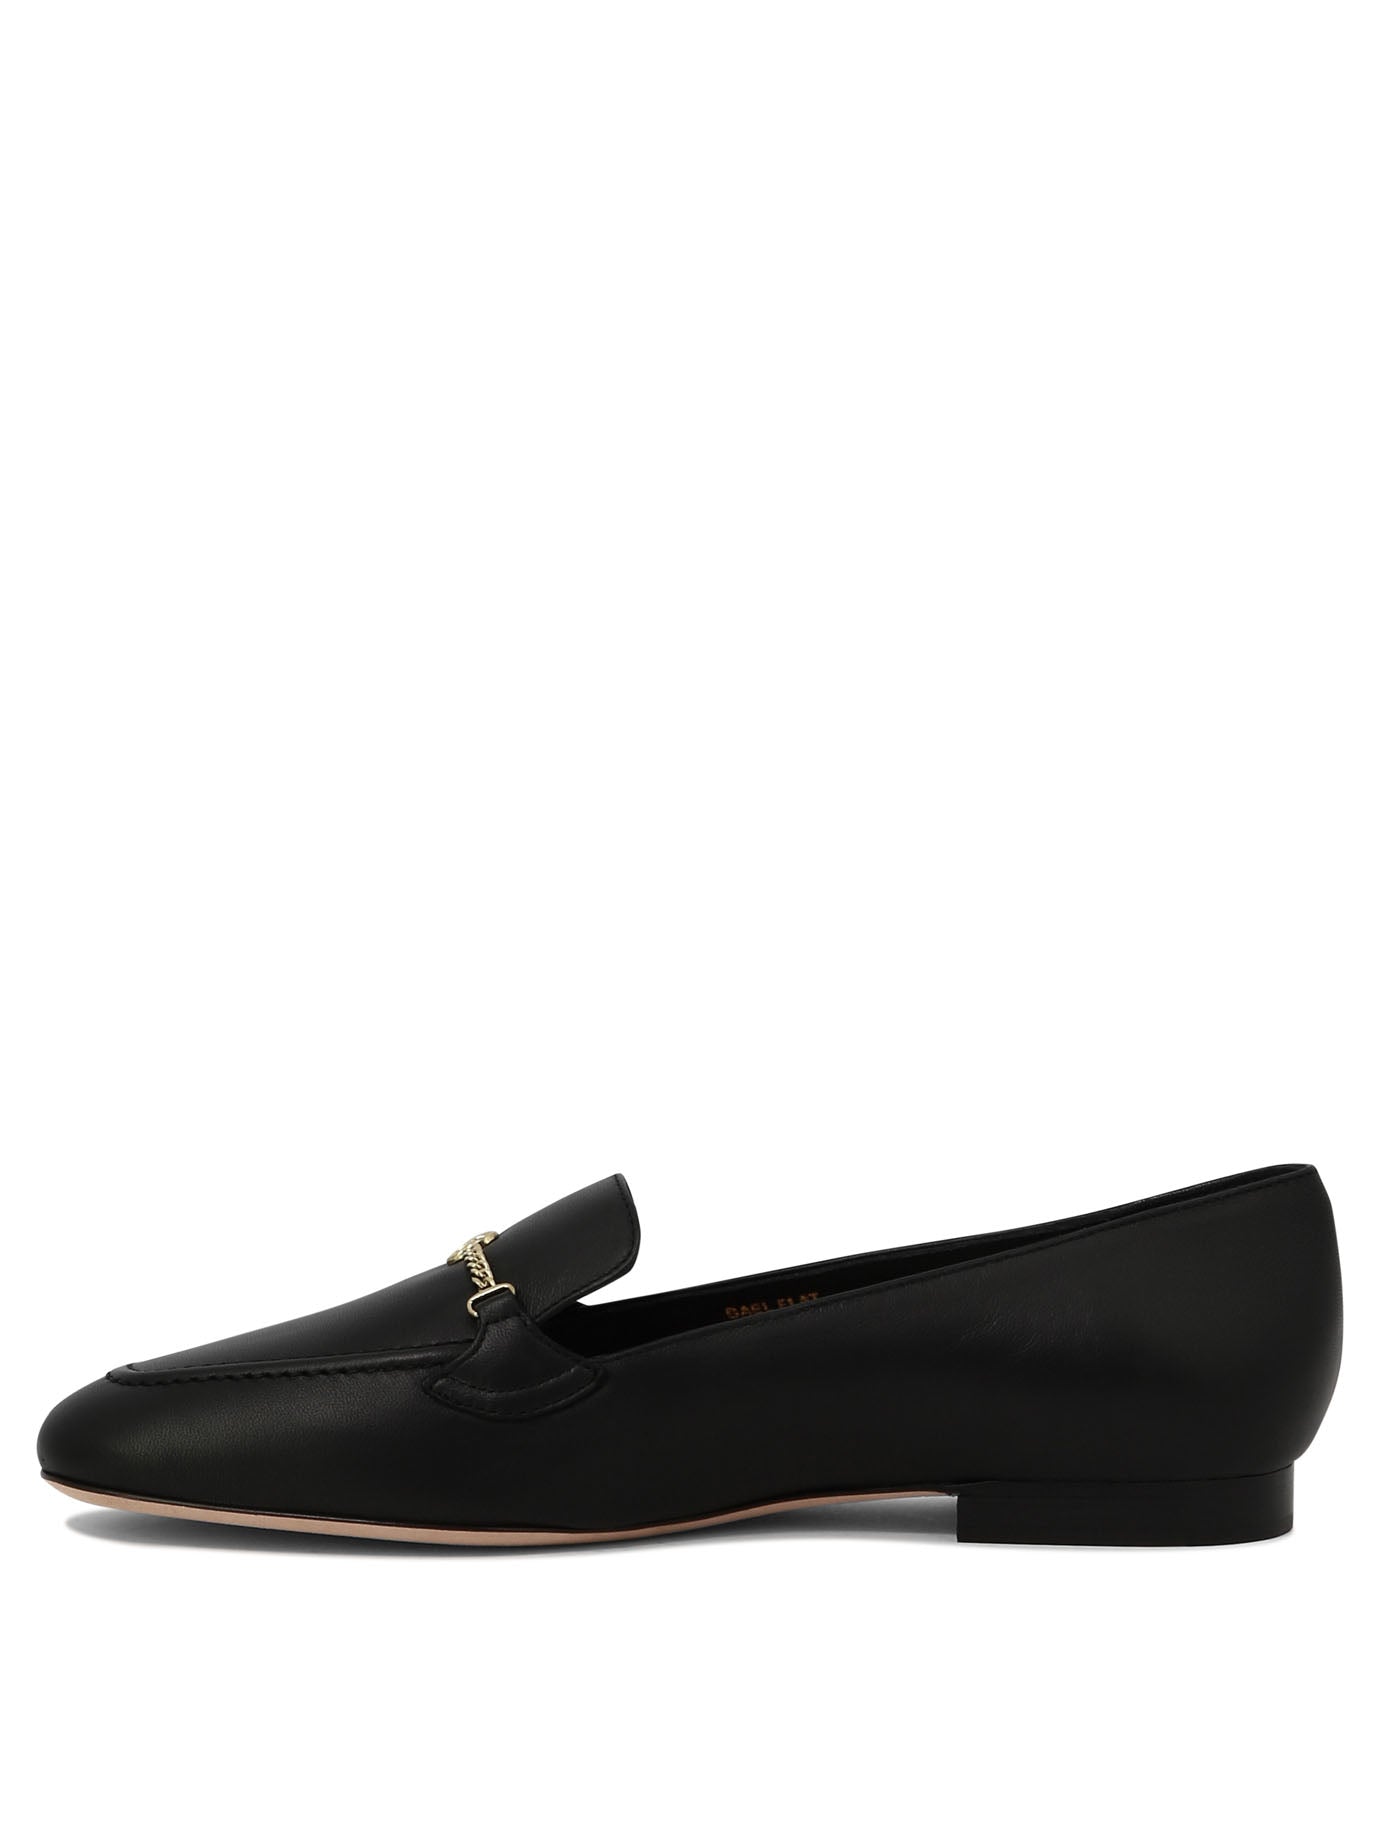 Shop Bally "gael" Loafers